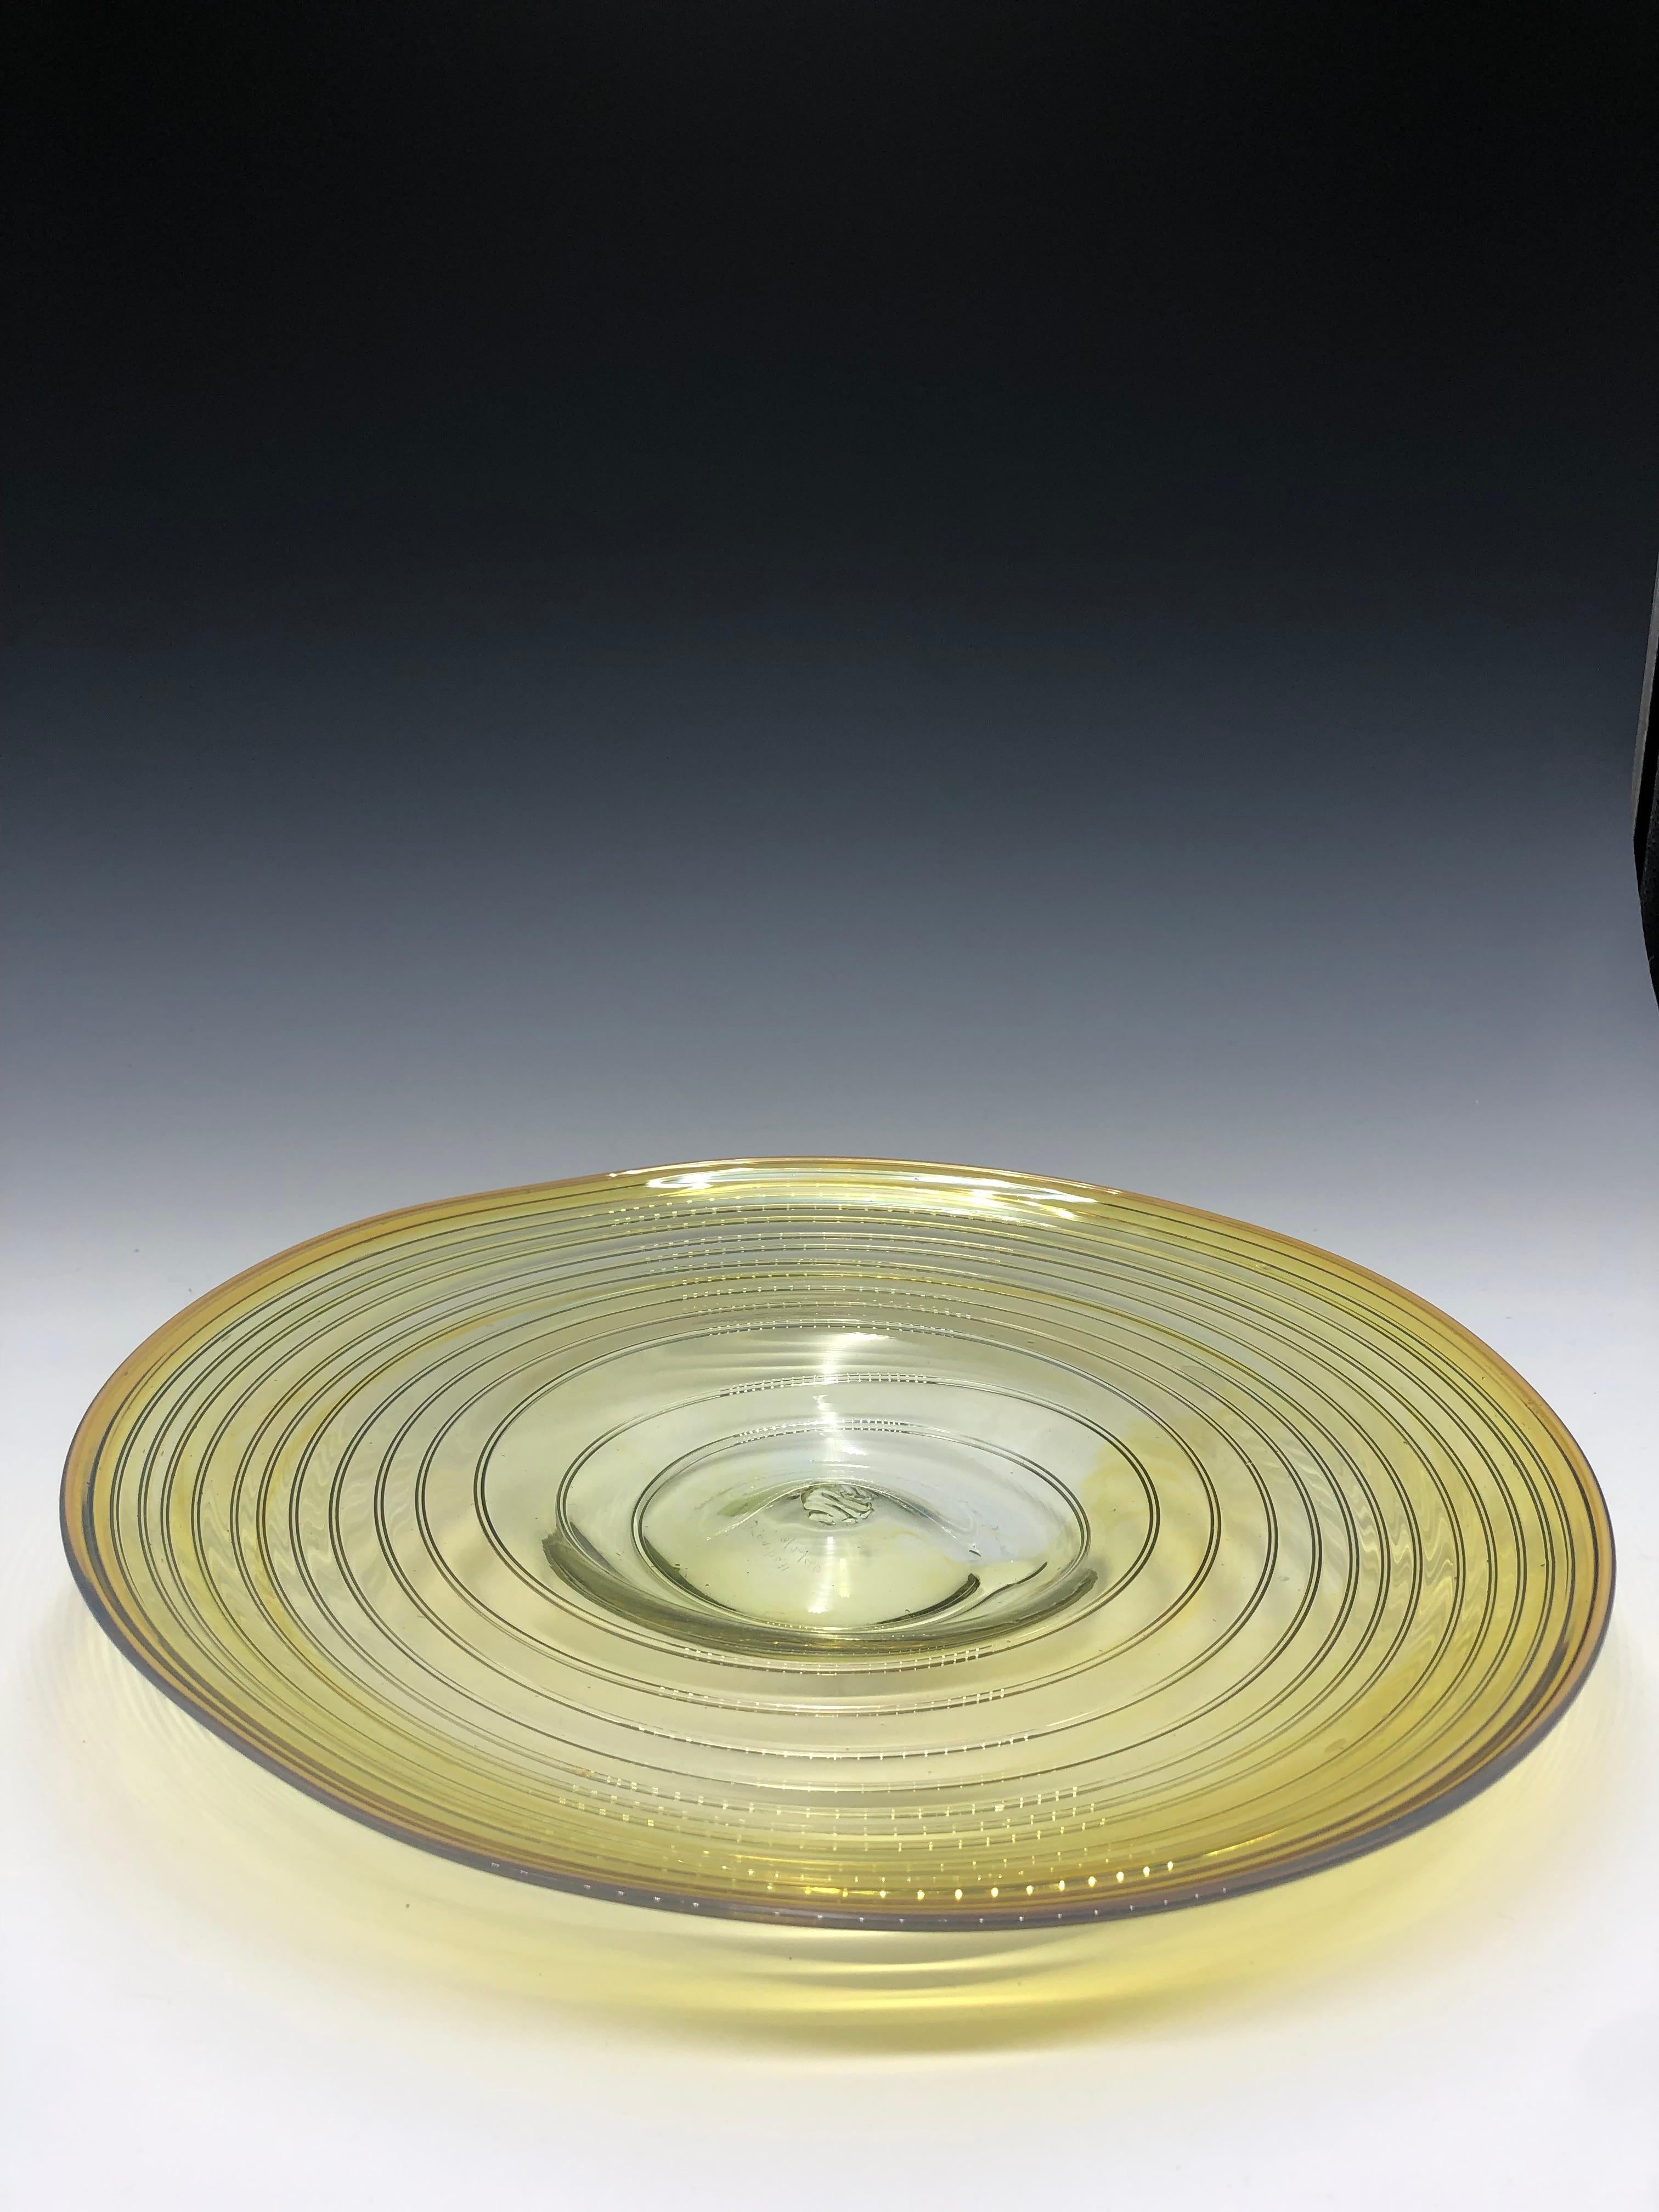 Vintage 1980s Hand Blown Studio Art Glass Plate by Peter Bramhall For Sale 1